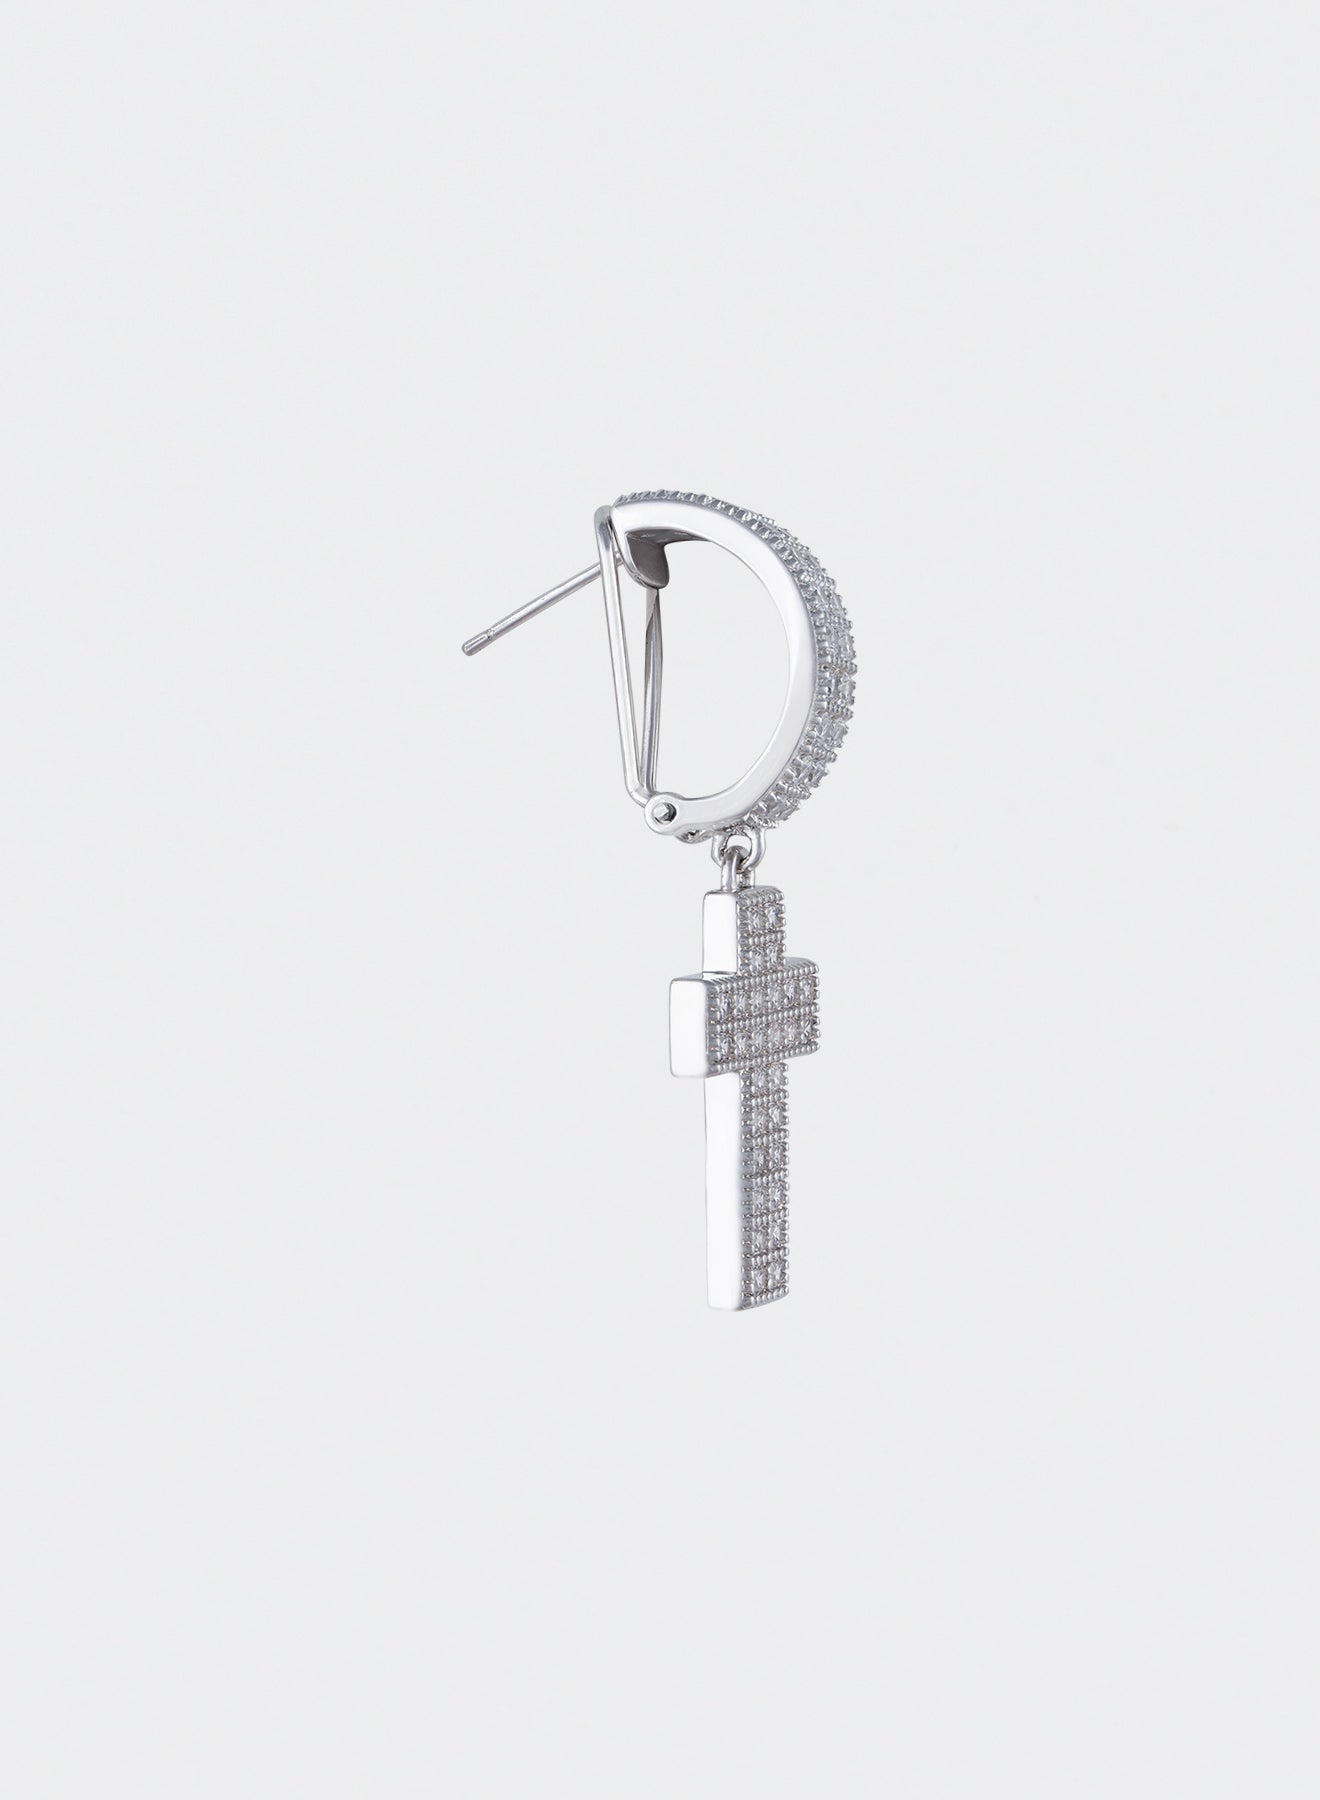 detail of 18k white gold coated cross mono earring with oversize hoop and hand-set micropavé stones in white